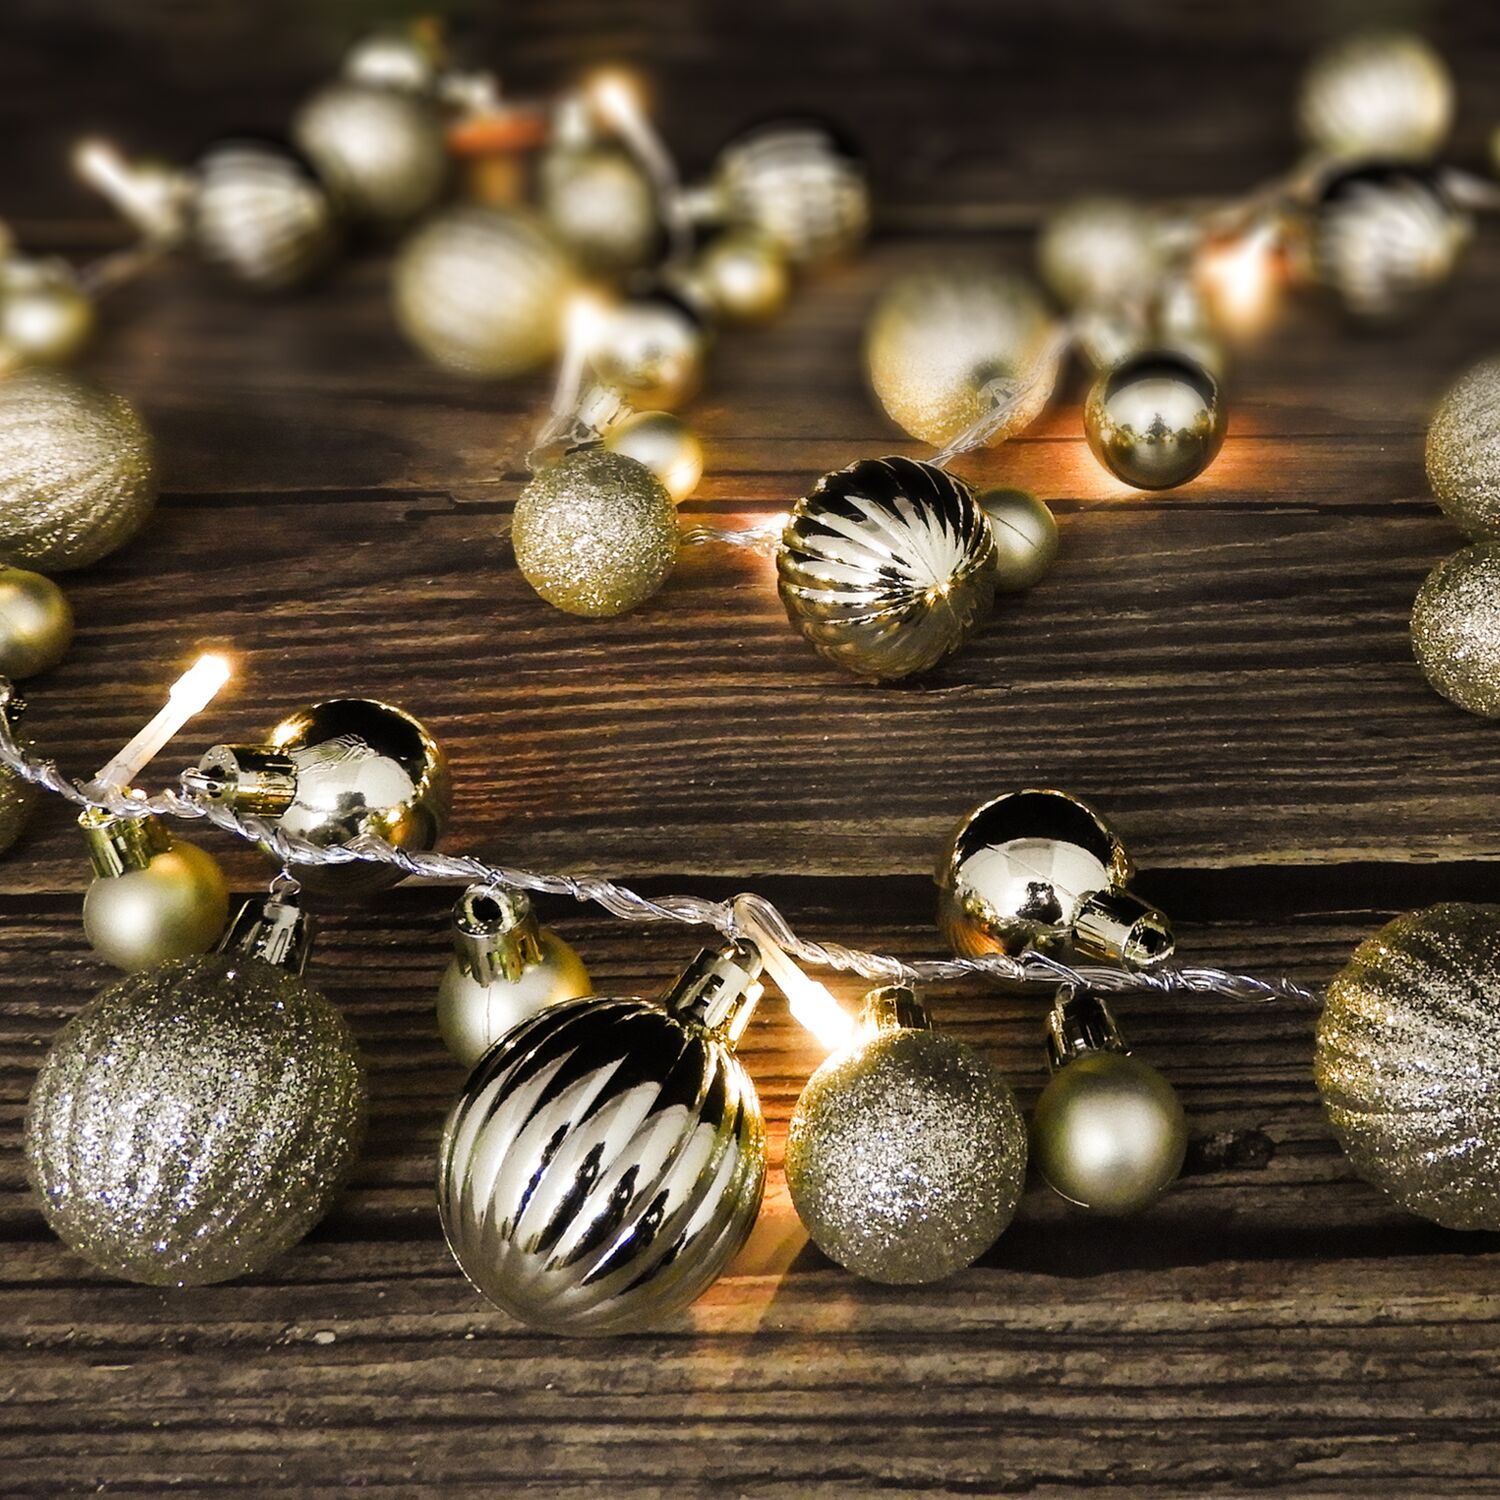 Photograph of string of fairy lights and baubles 